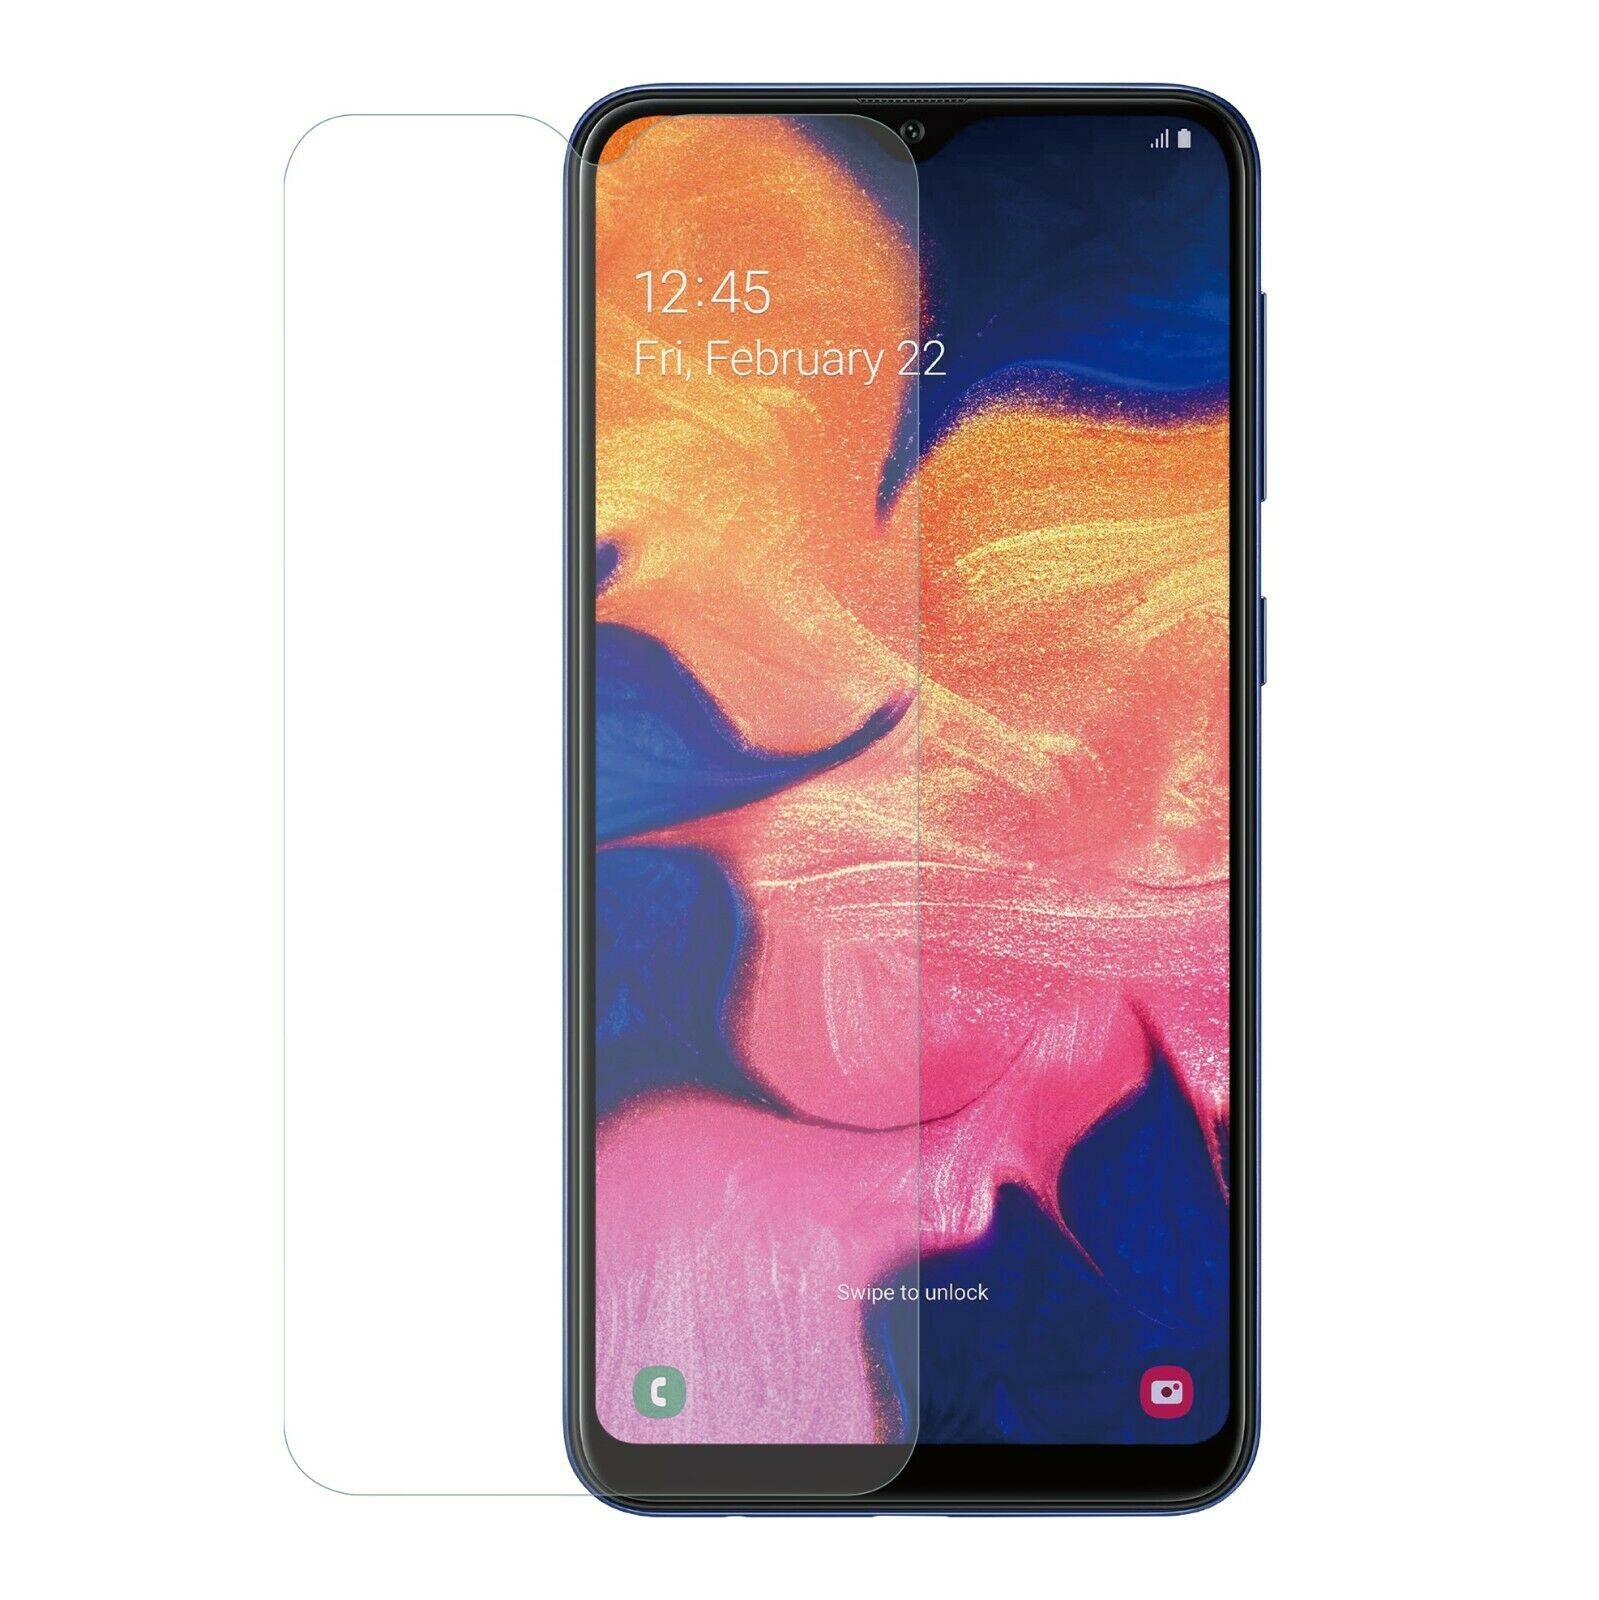 Samsung Galaxy A10 - Premium Tempered Glass for [product_price] - First Help Tech